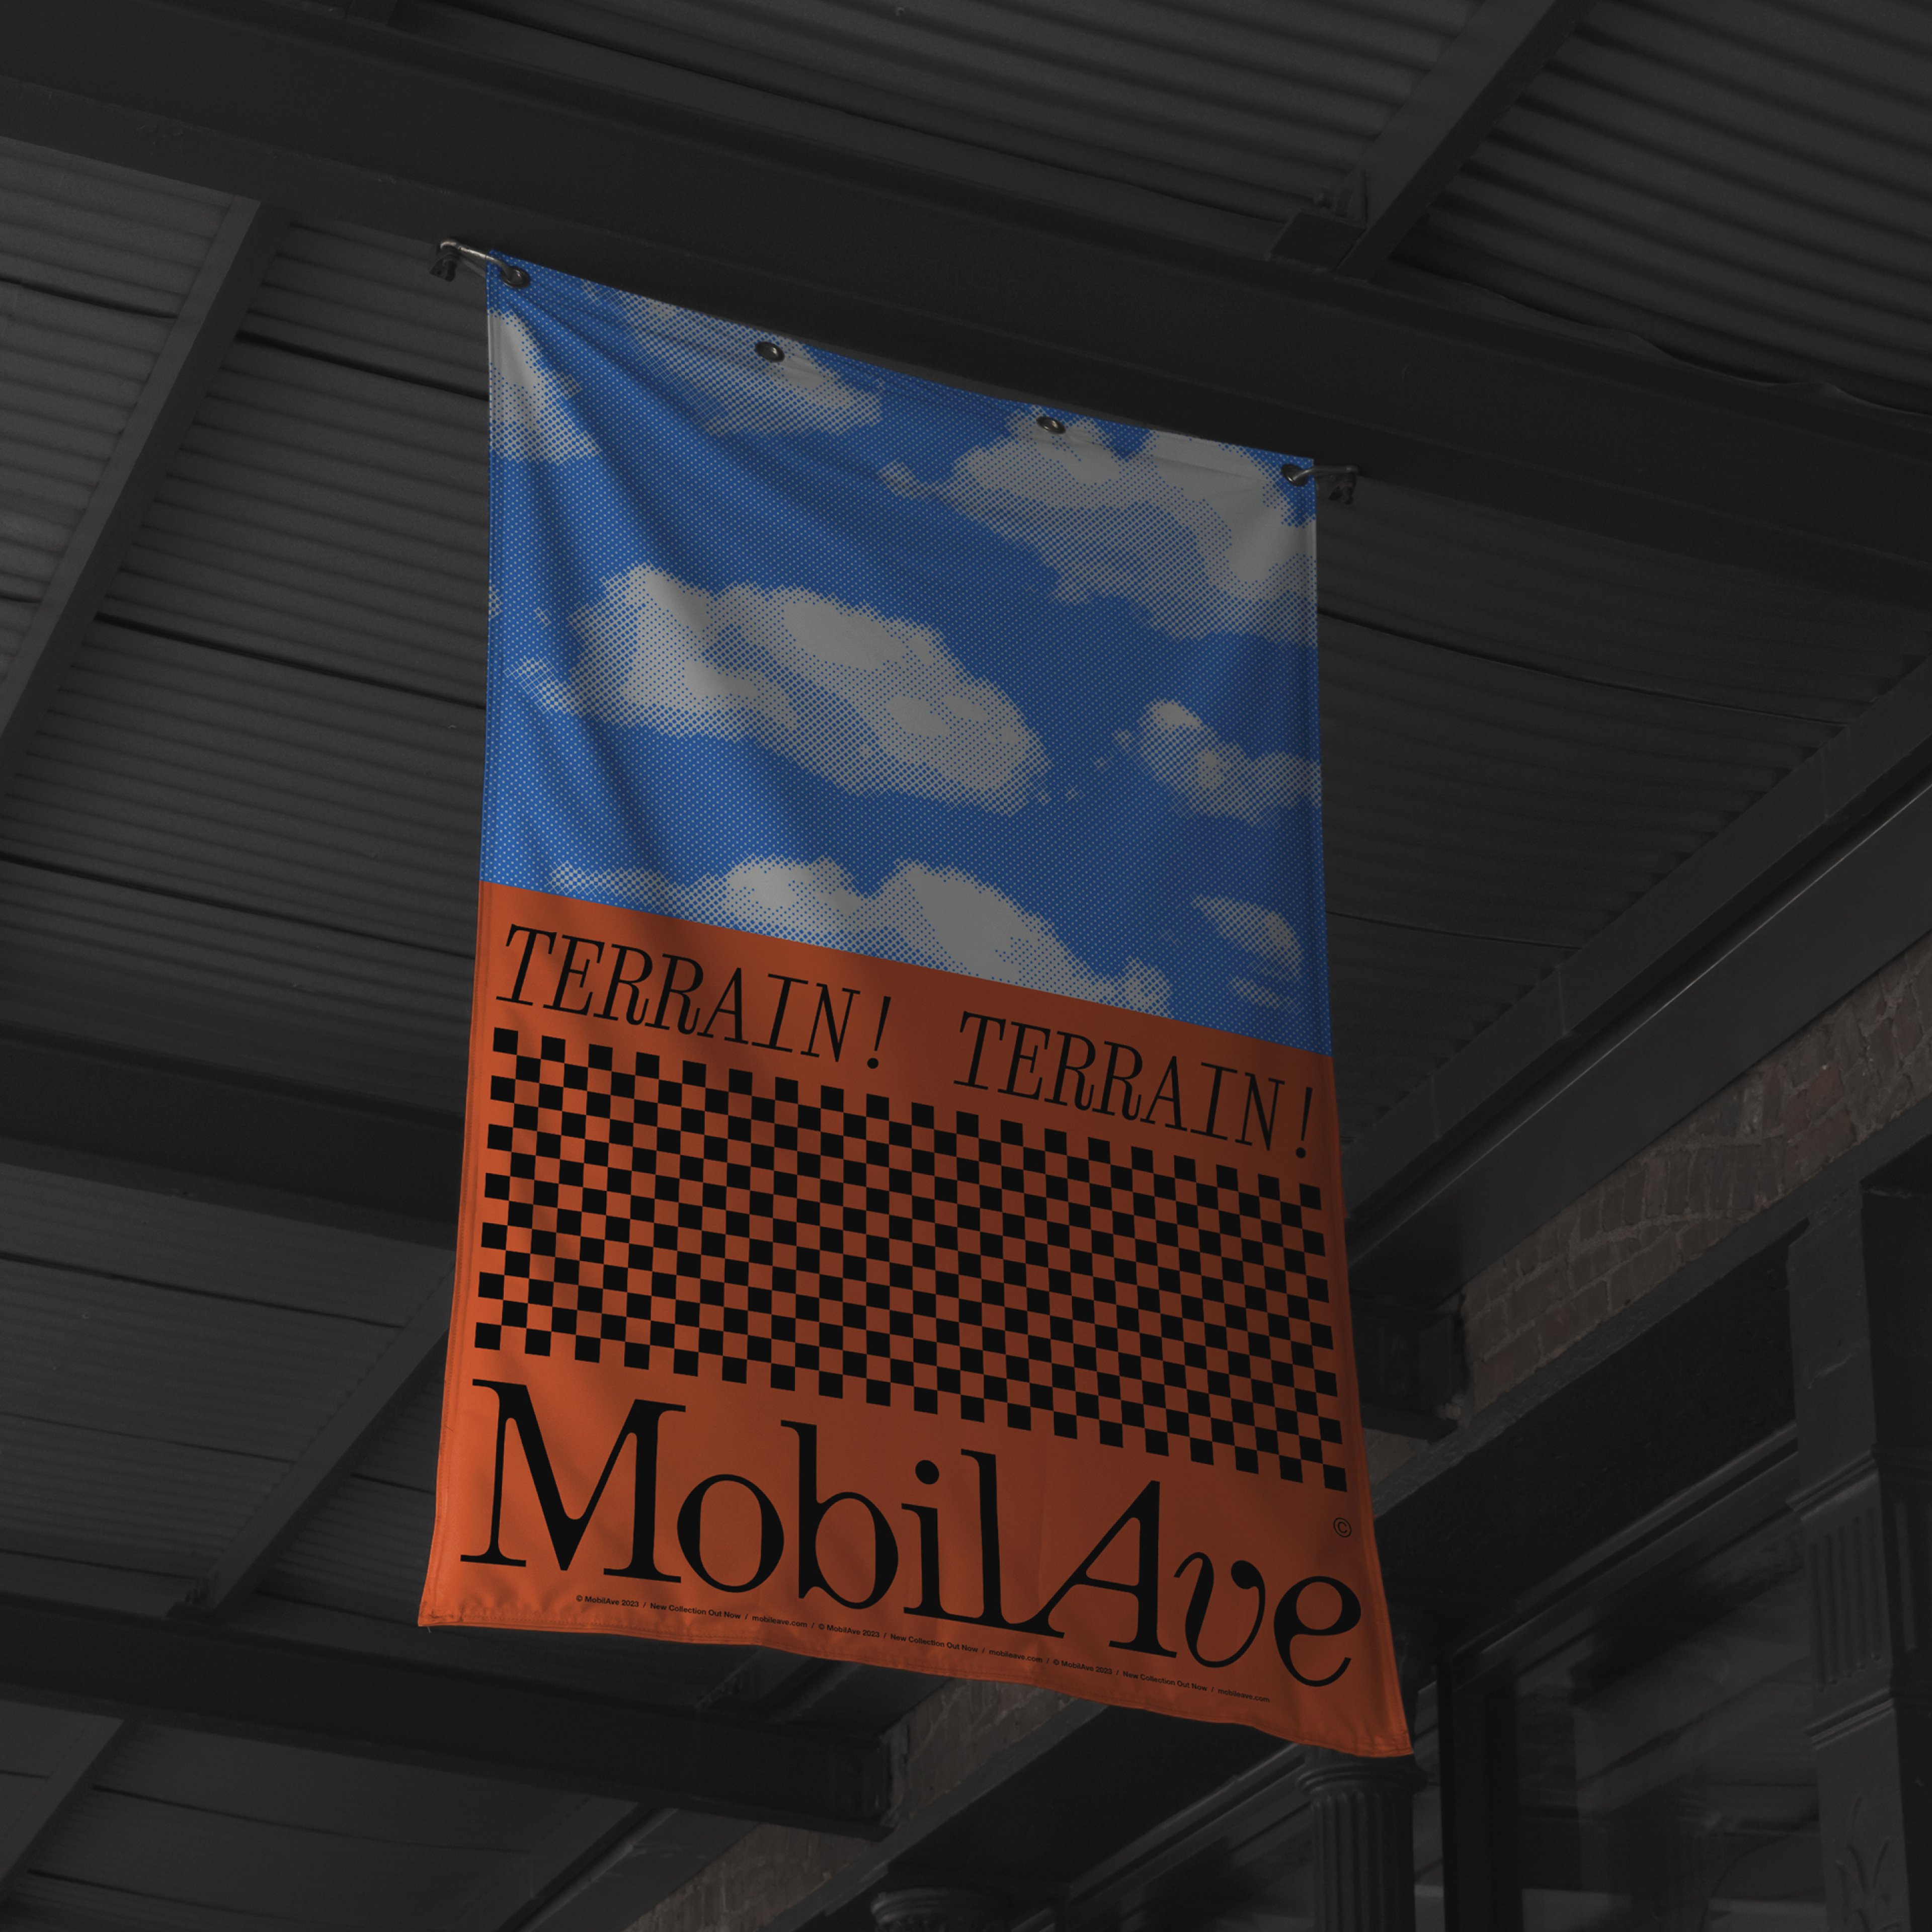 A Mobil Ave branded printed flag hanging from the ceiling of a building